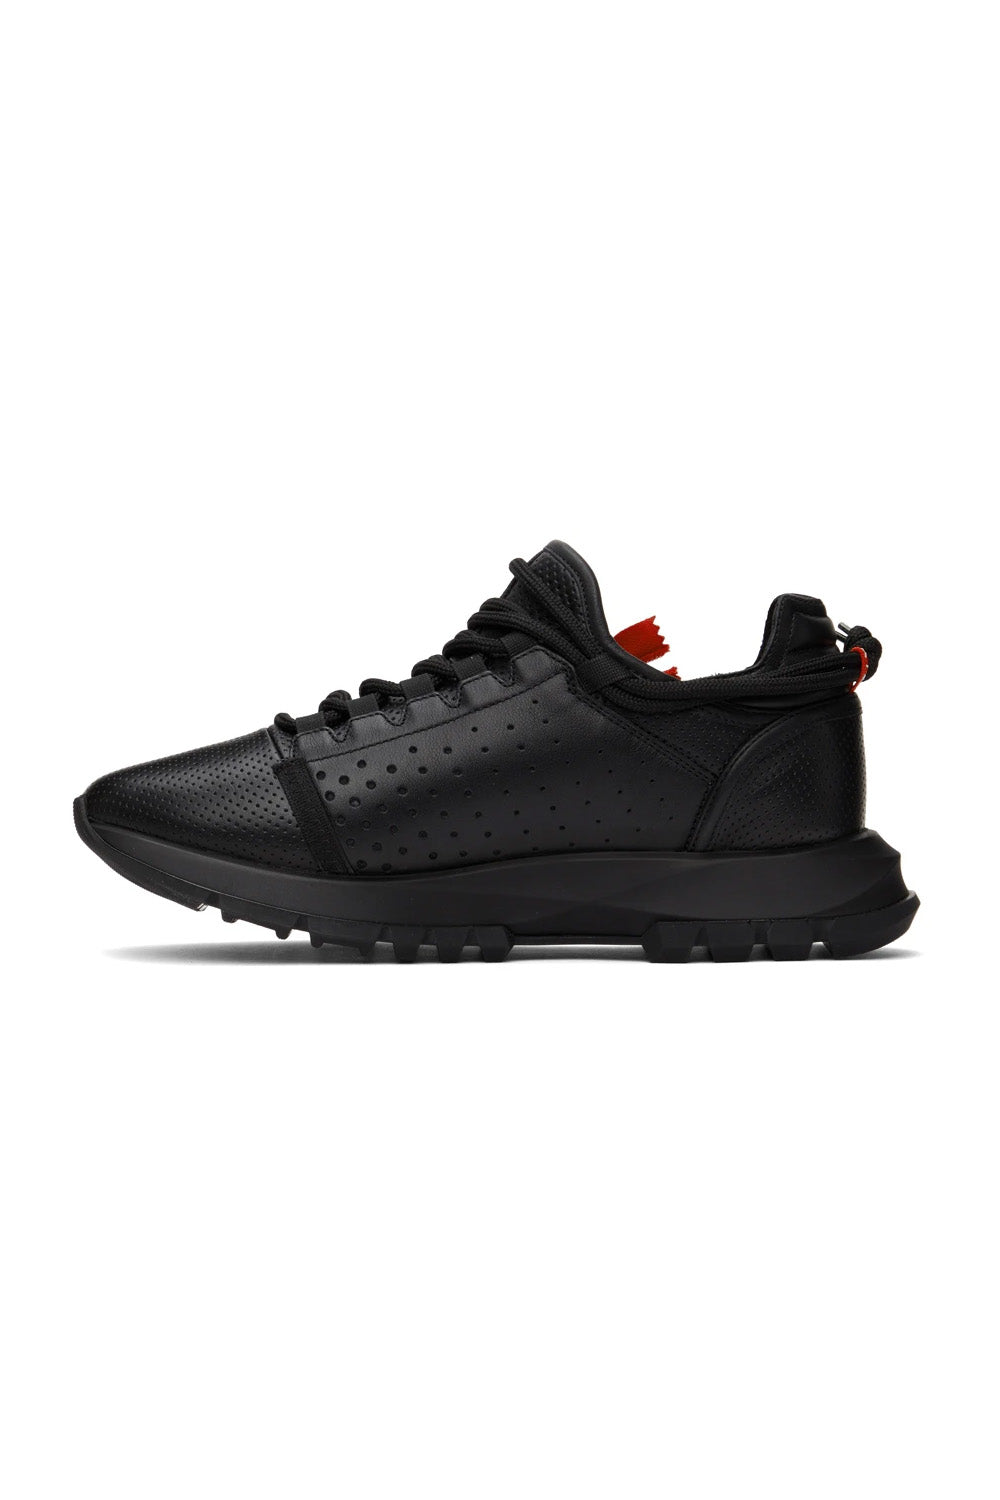 GIVENCHY Black & Red Spectre Zip Sneakers